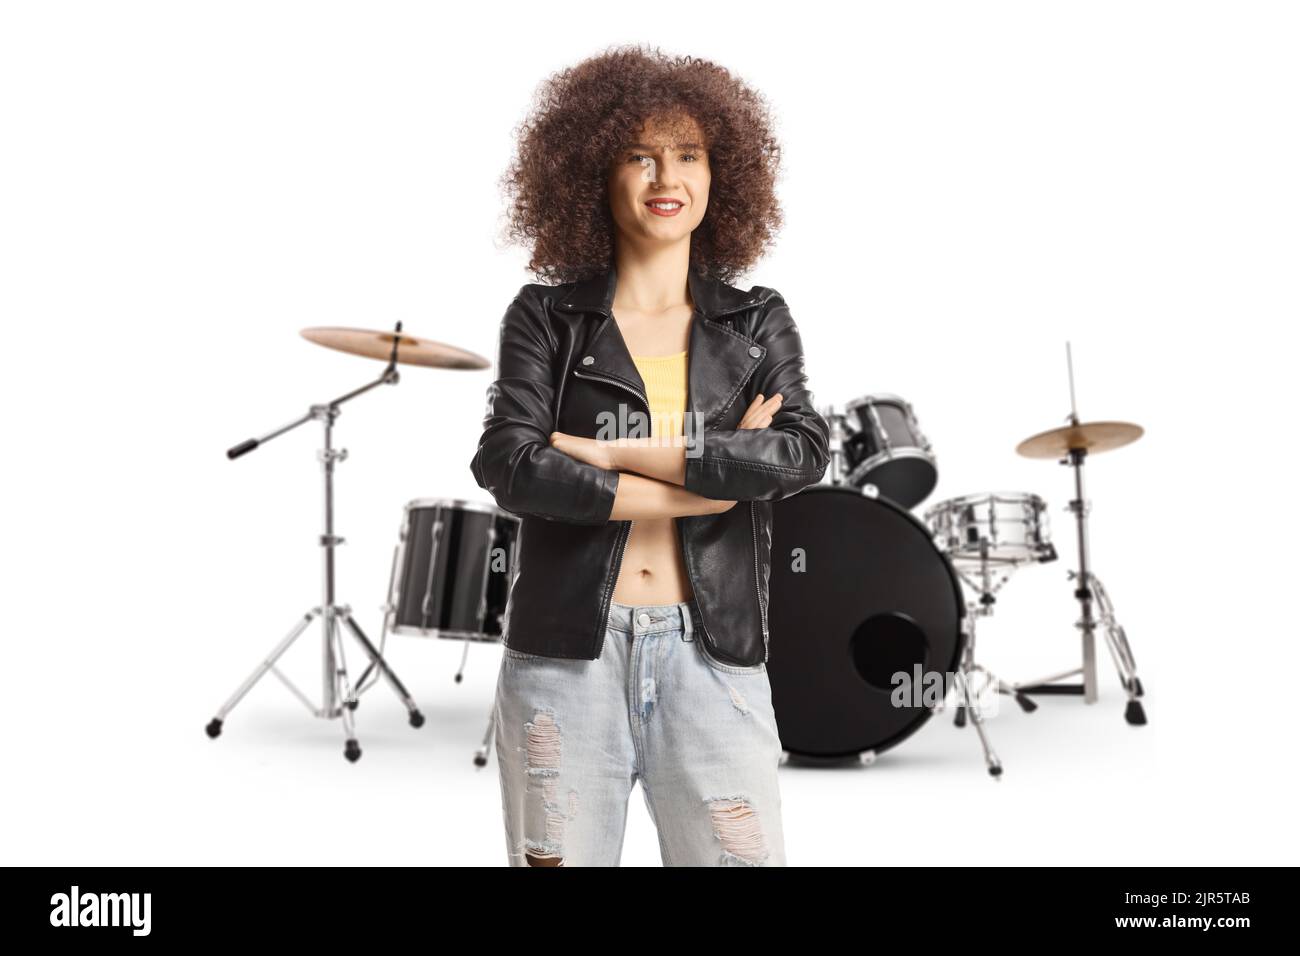 Young woman with afro hairstyle wearing a leather jacket and standing on front of drums isolated on white background Stock Photo